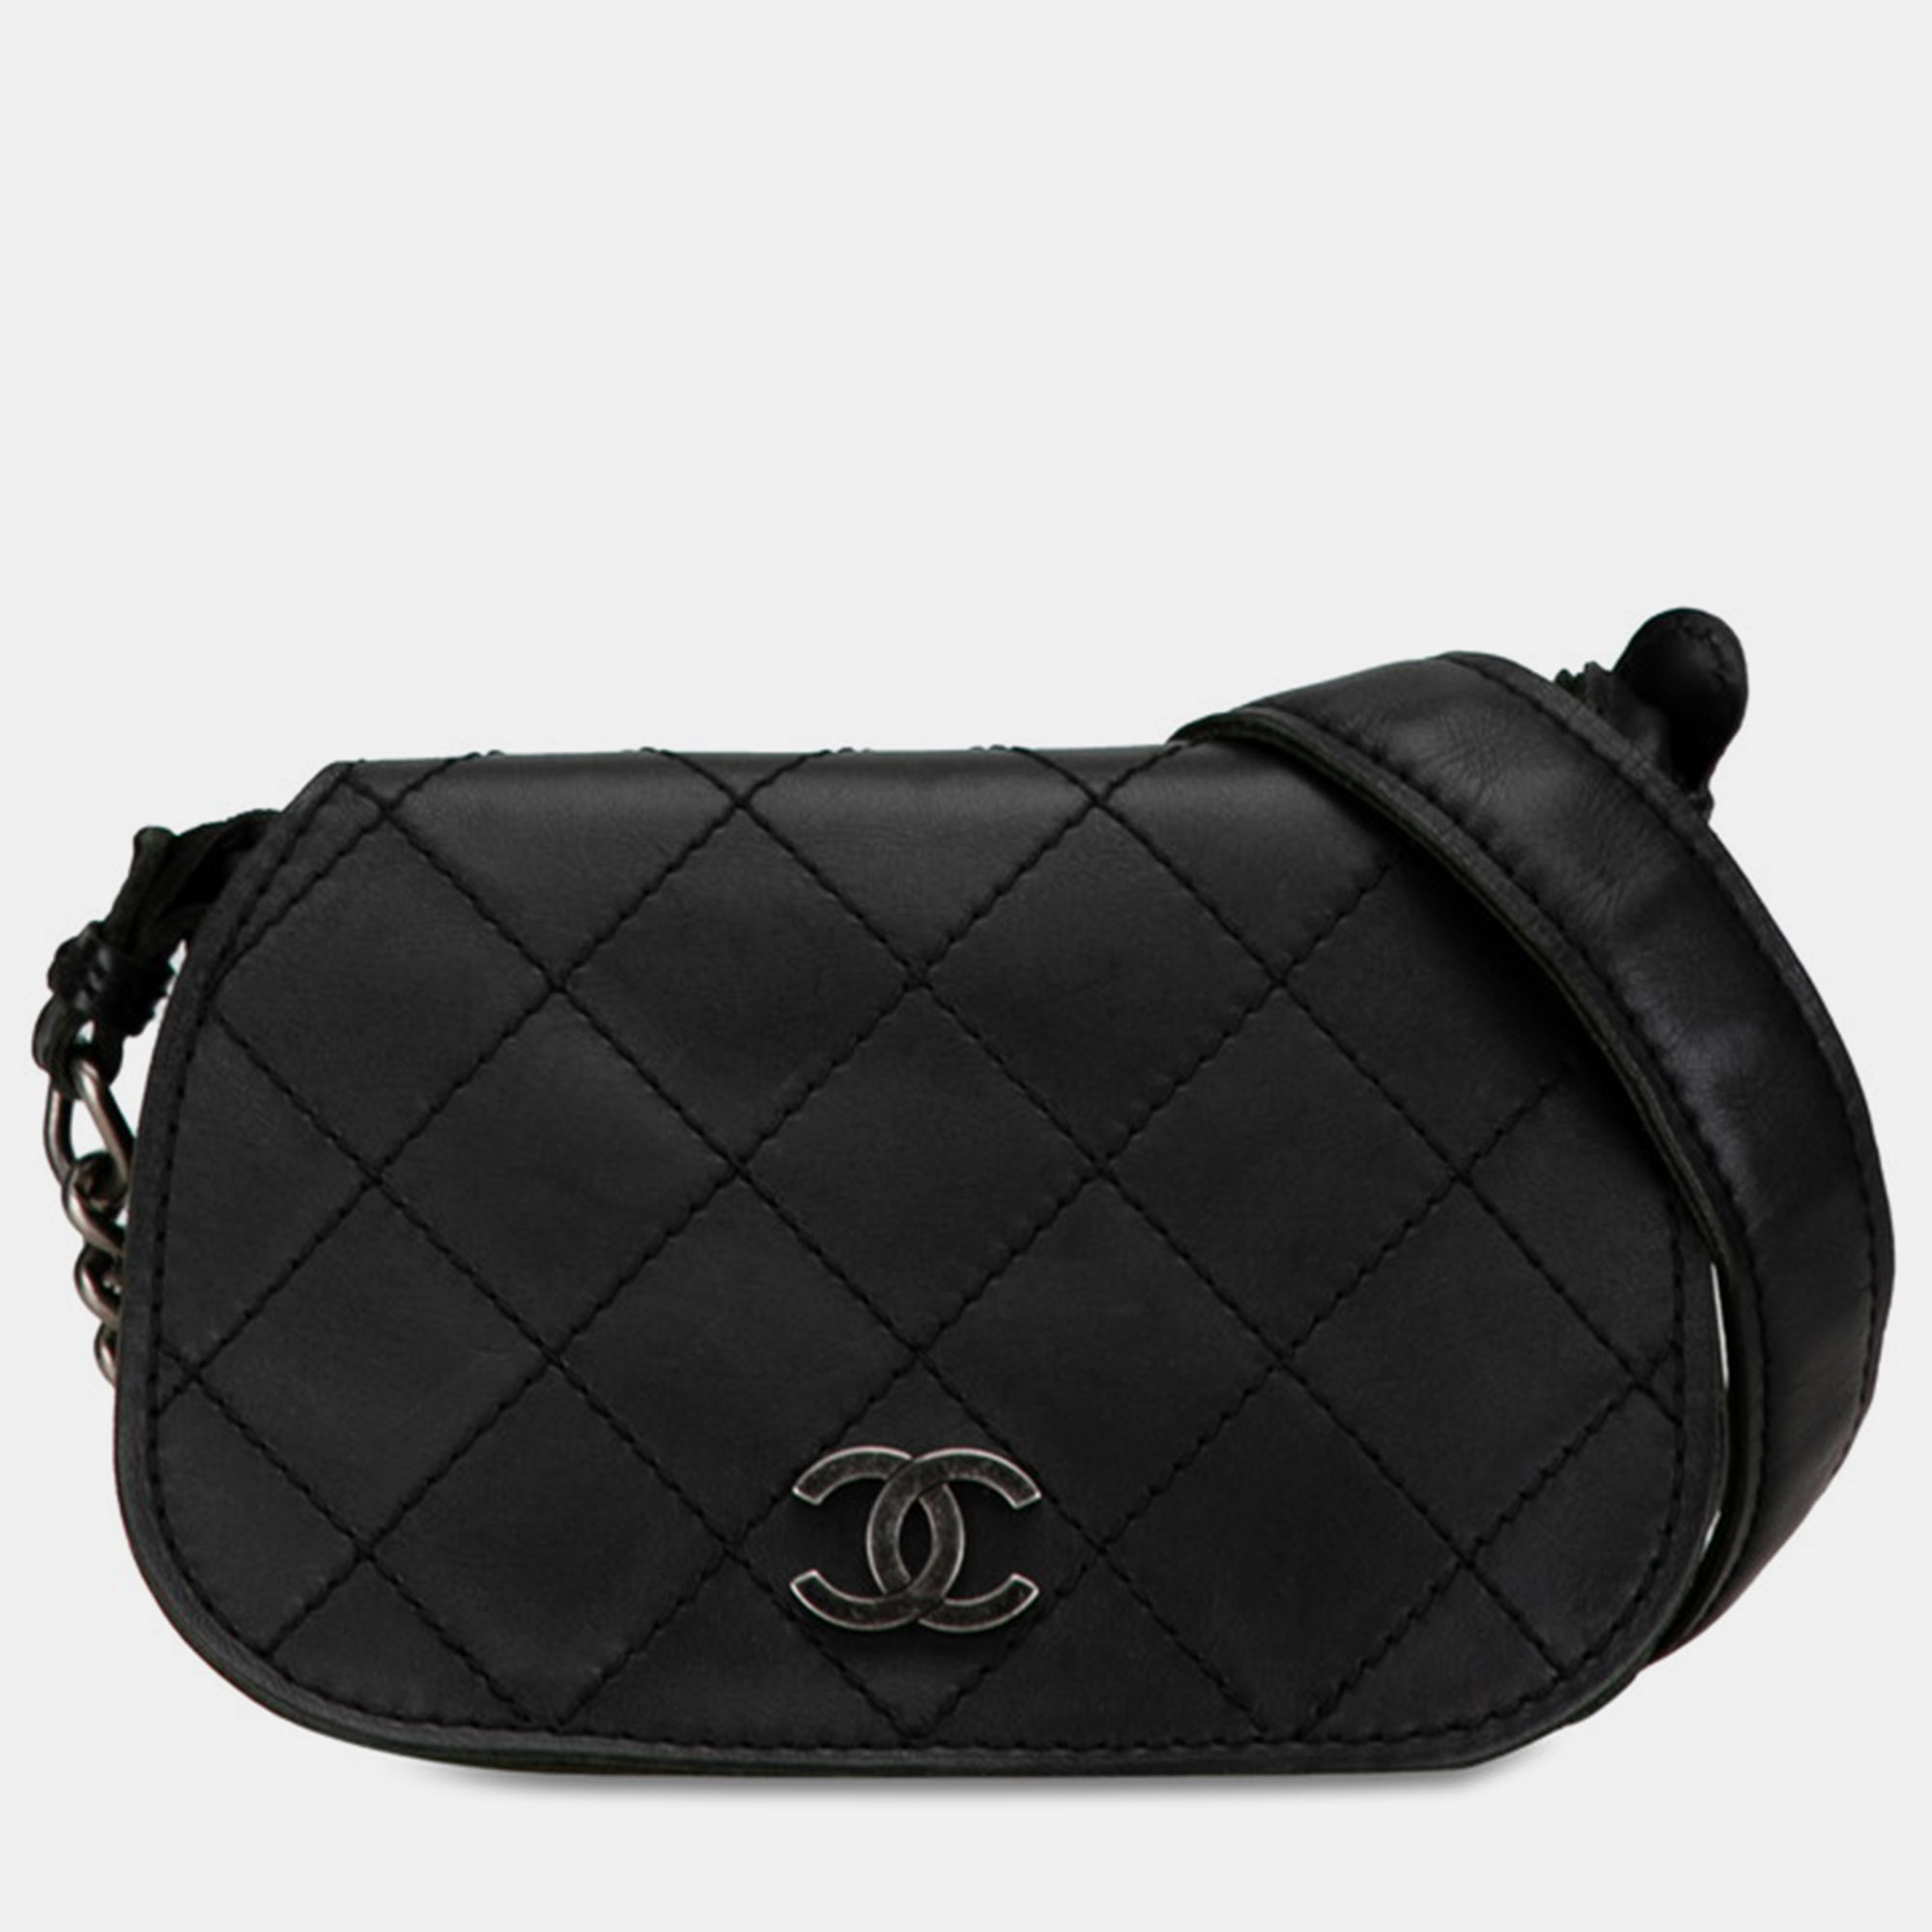 

Chanel Black Quilted Leather Chain Flap Bag